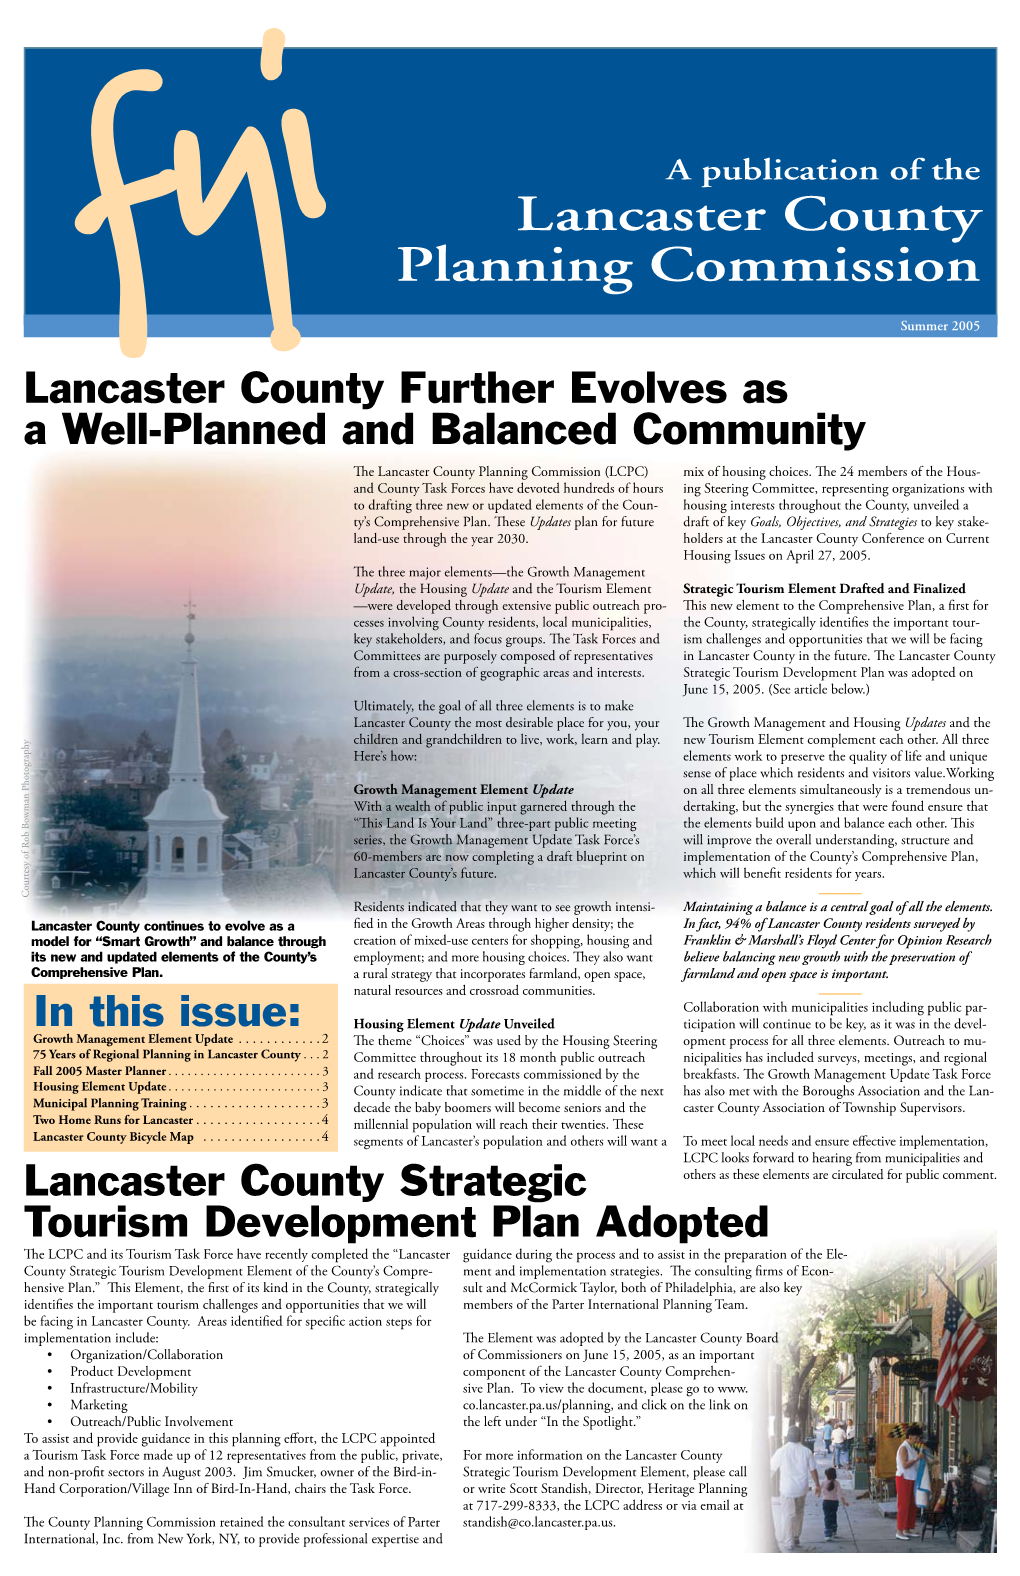 A Publication of the Lancaster County Planning Commission